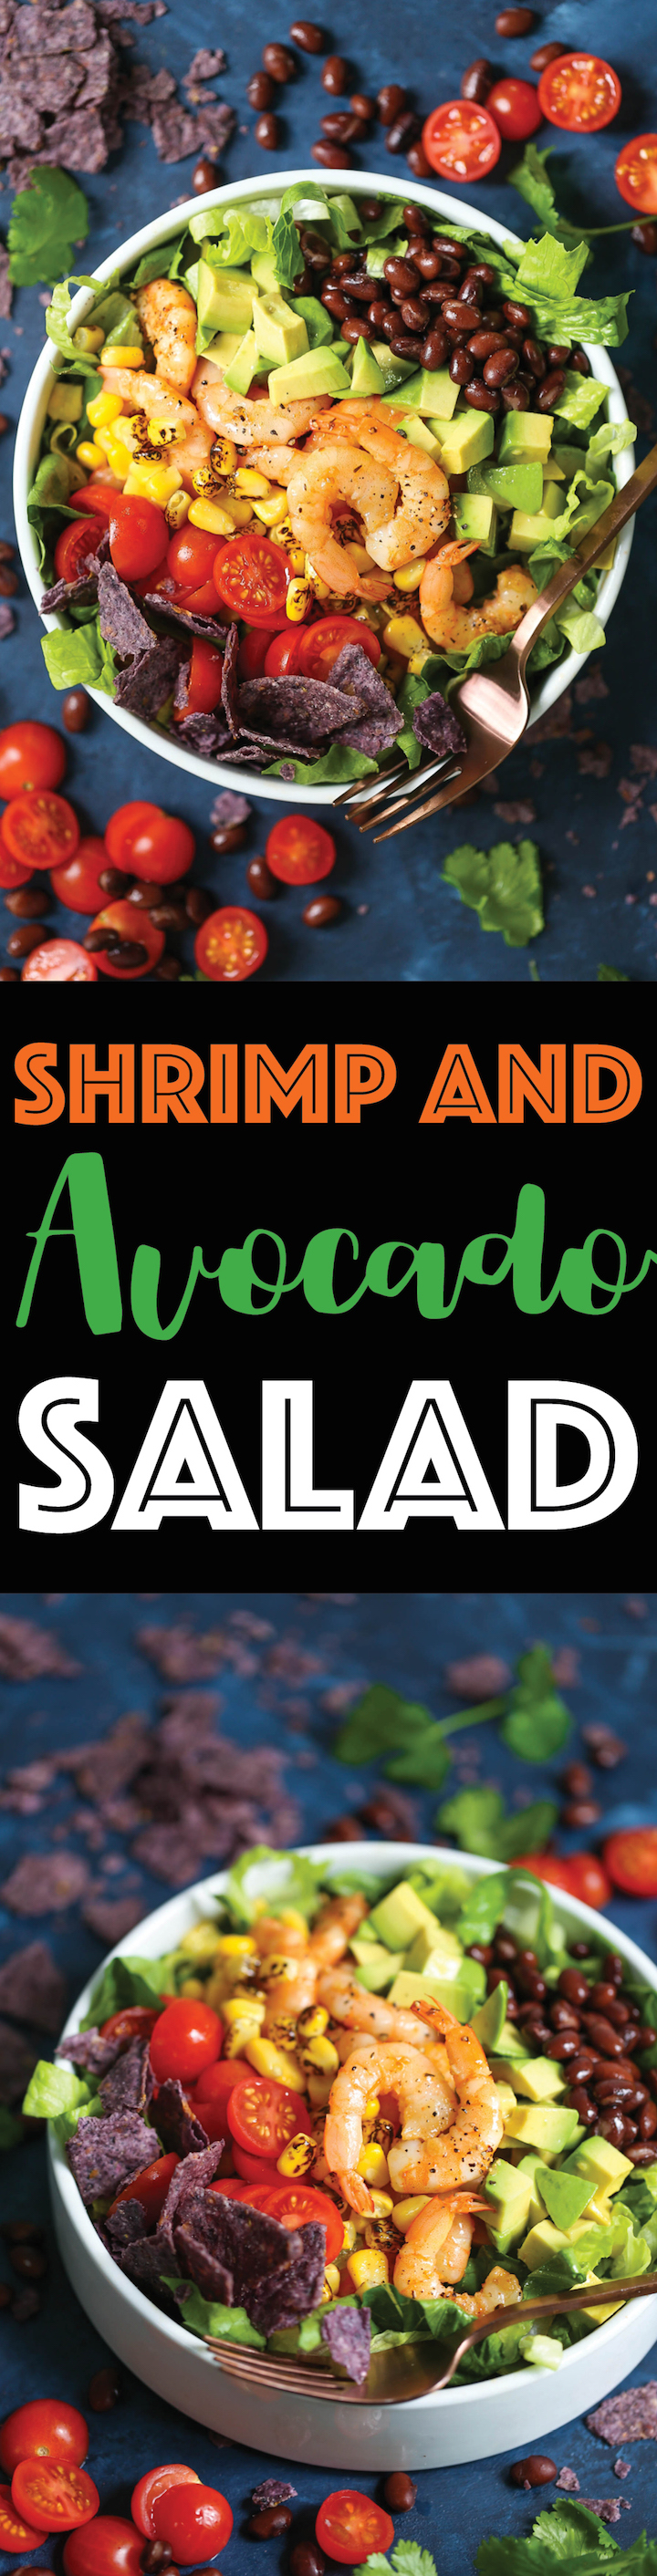 Shrimp and Avocado Salad - This tastes just like shrimp taco in salad form! Loaded with tomatoes, corn, black beans, cilantro, avocado and crushed tortilla chips with the very best cilantro lime dressing ever!